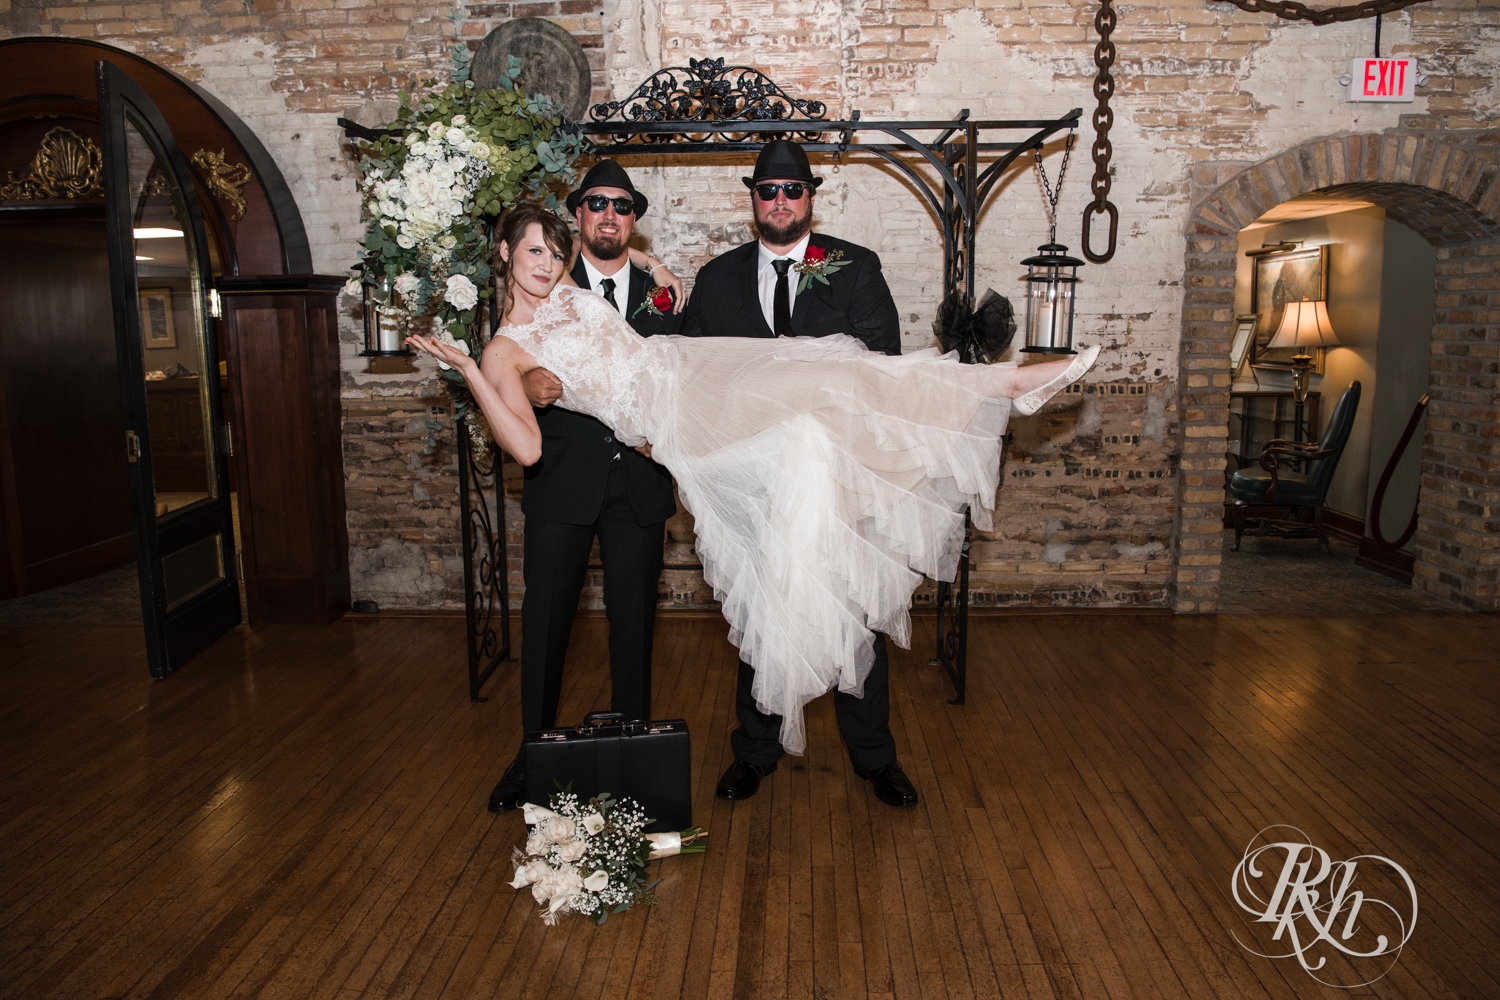 Bride held up by brothers dressed as The Blues Brothers at Kellerman's Event Center in White Bear Lake, Minnesota.